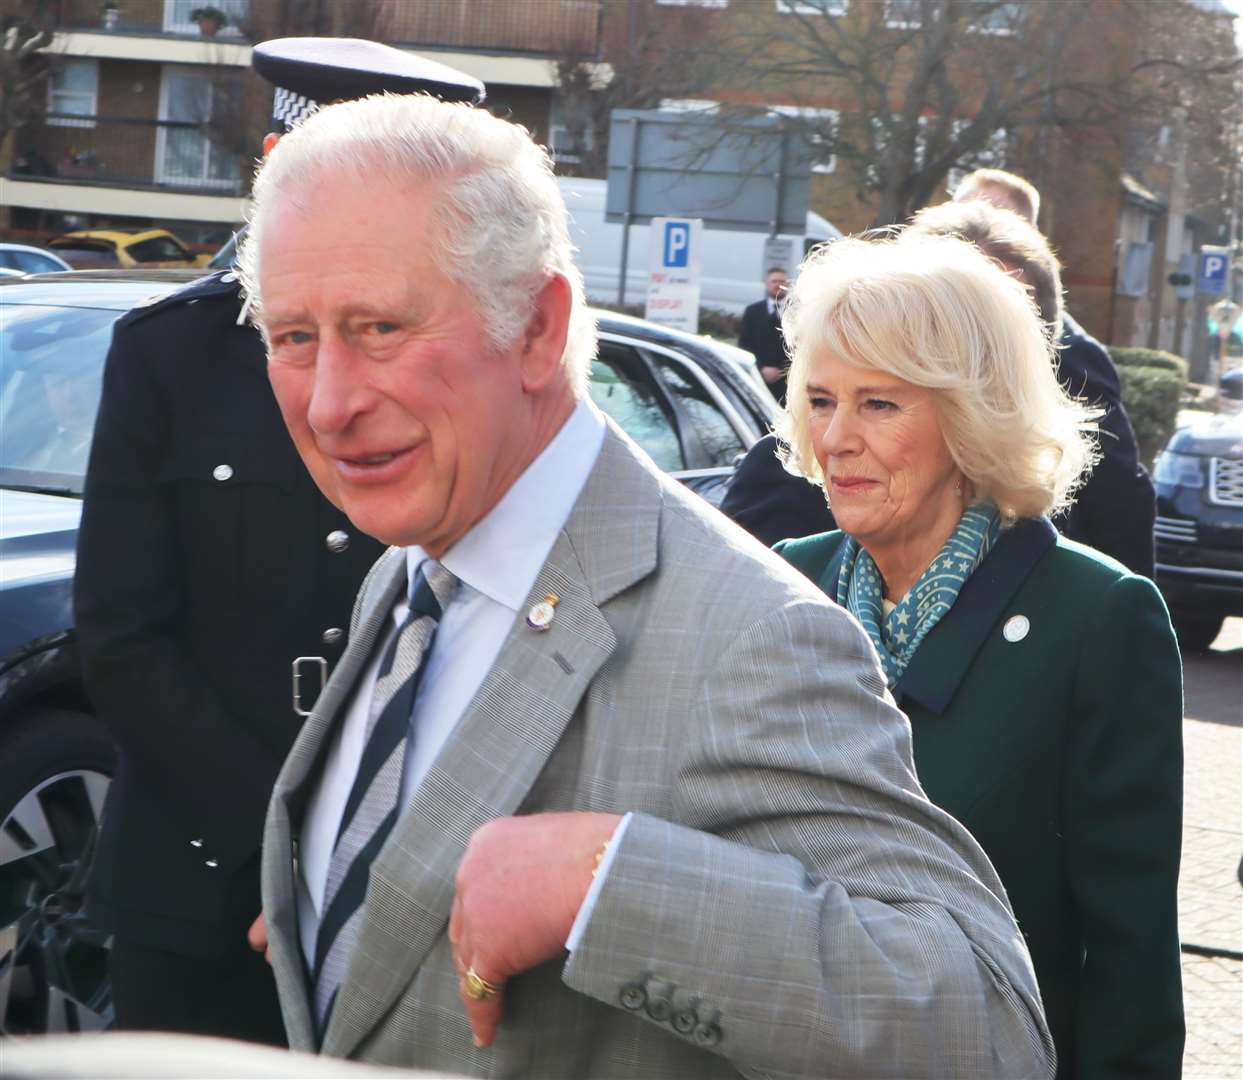 Prince Charles and Camilla the Duchess of Cornwall arriving for a whistle-stop visit to see Sheppey Matters earlier this month